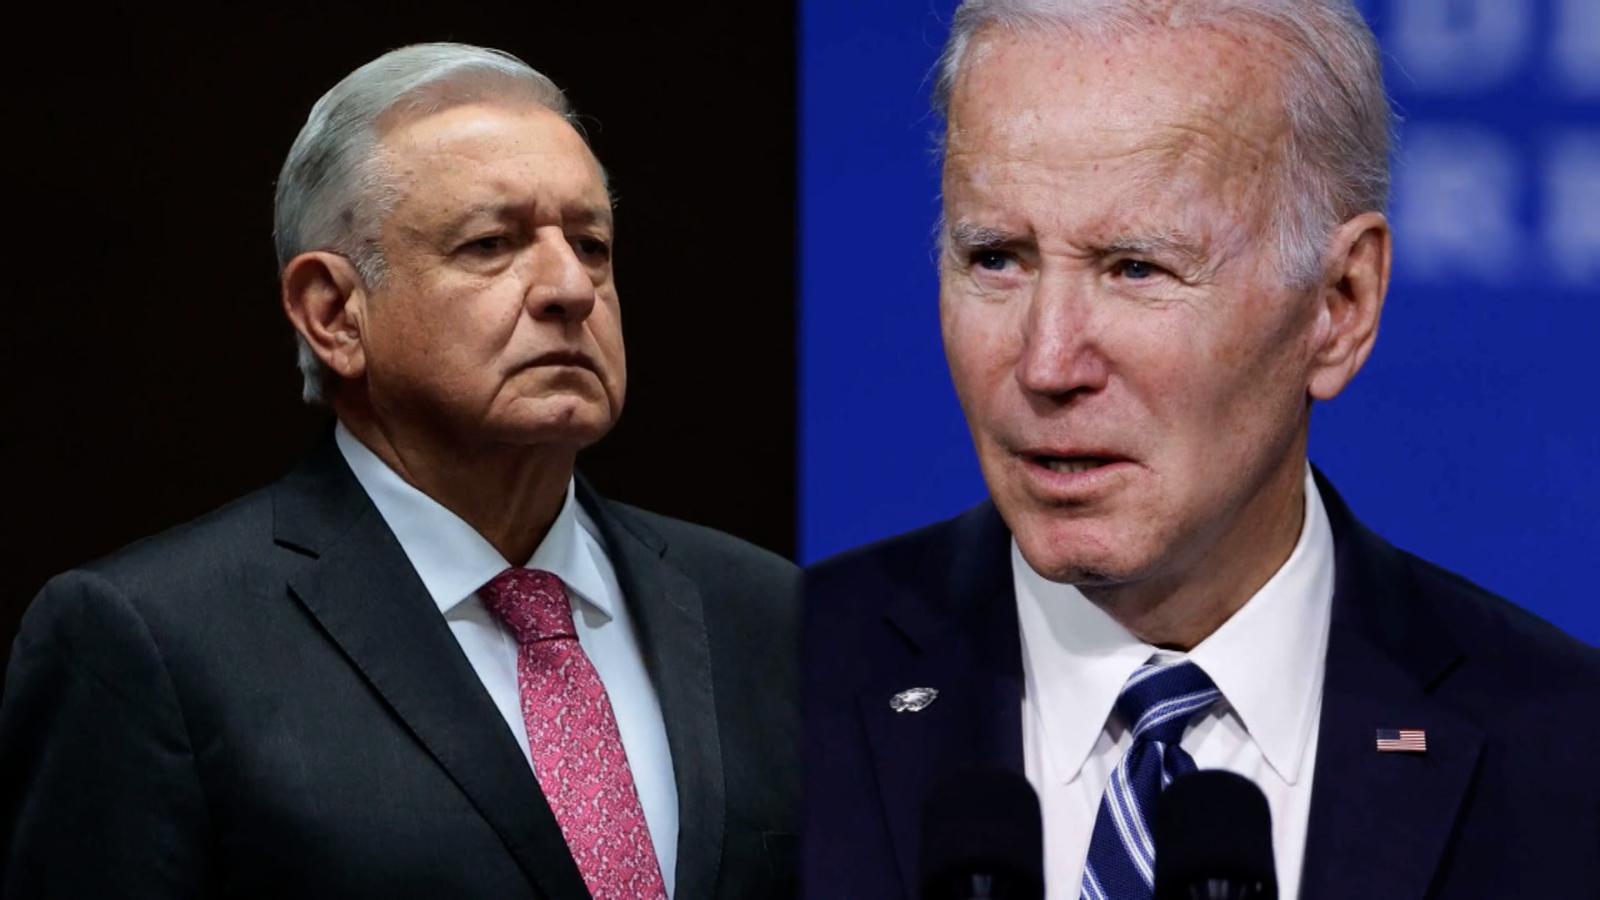 Biden and López Obrador focus on immigration during their call days before Title 42 ends